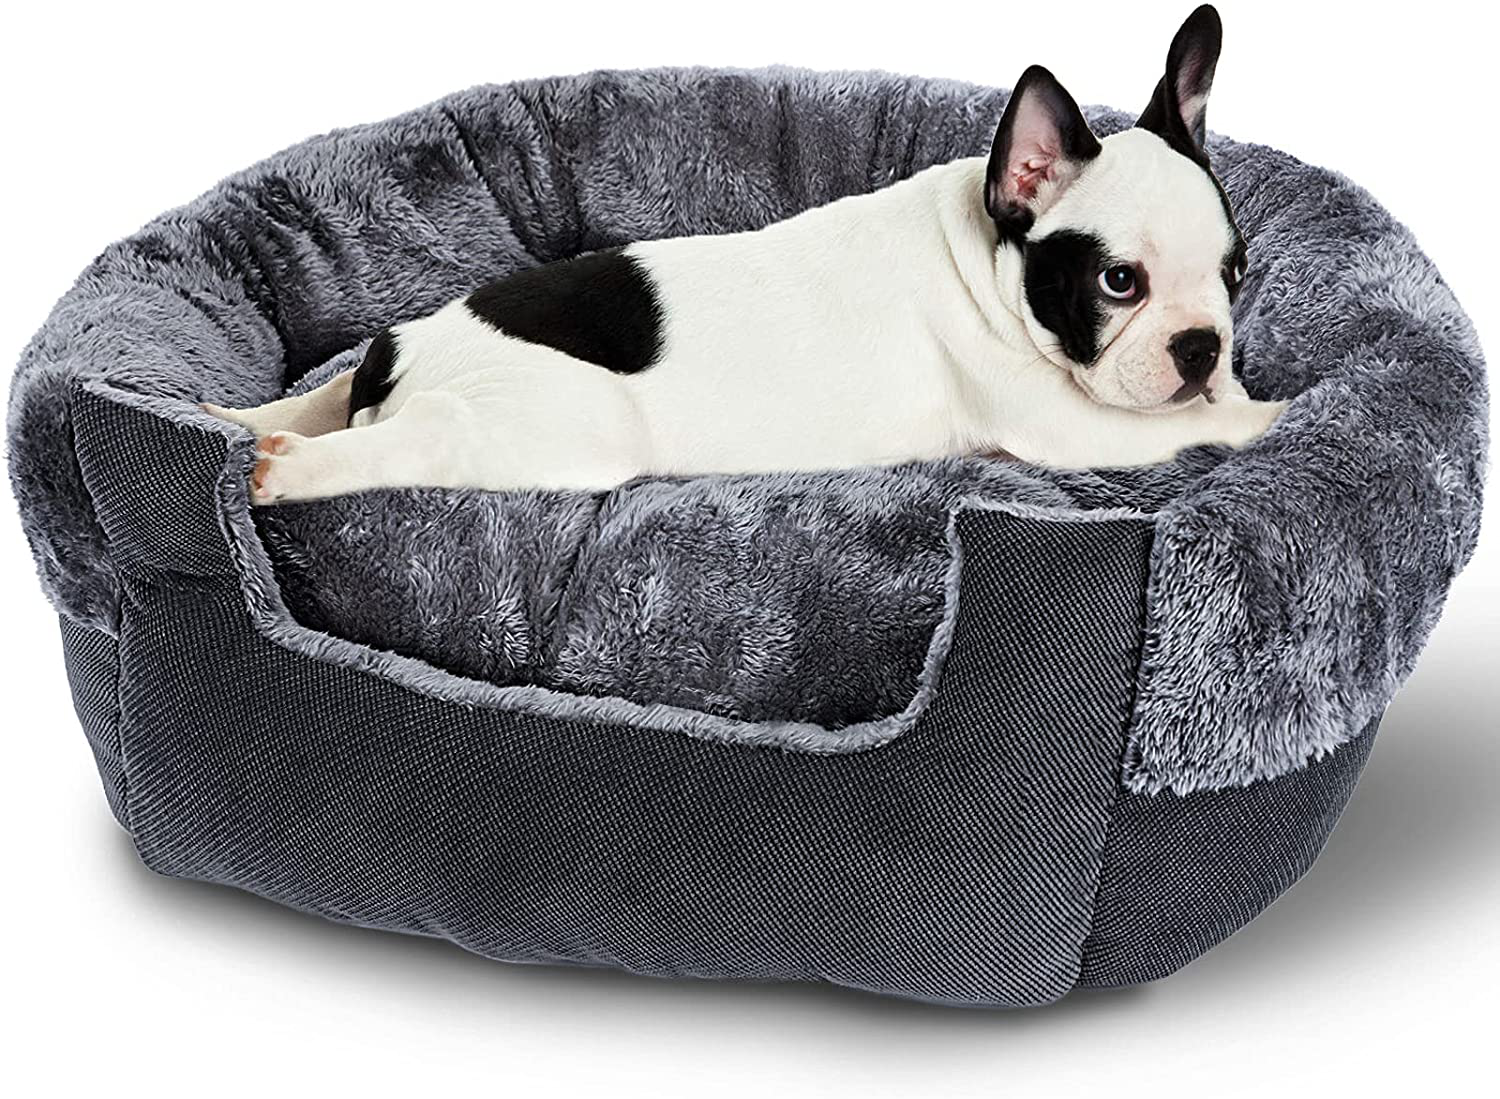 GASUR Dog Beds for Small Dogs & Cat Beds for Indoor Cats, Detachable Machine Washable Soft & Plush Calming Dog Bed, round Pet Beds for Indoor Cats, Warming & Cooling Kitten Puppy Bed